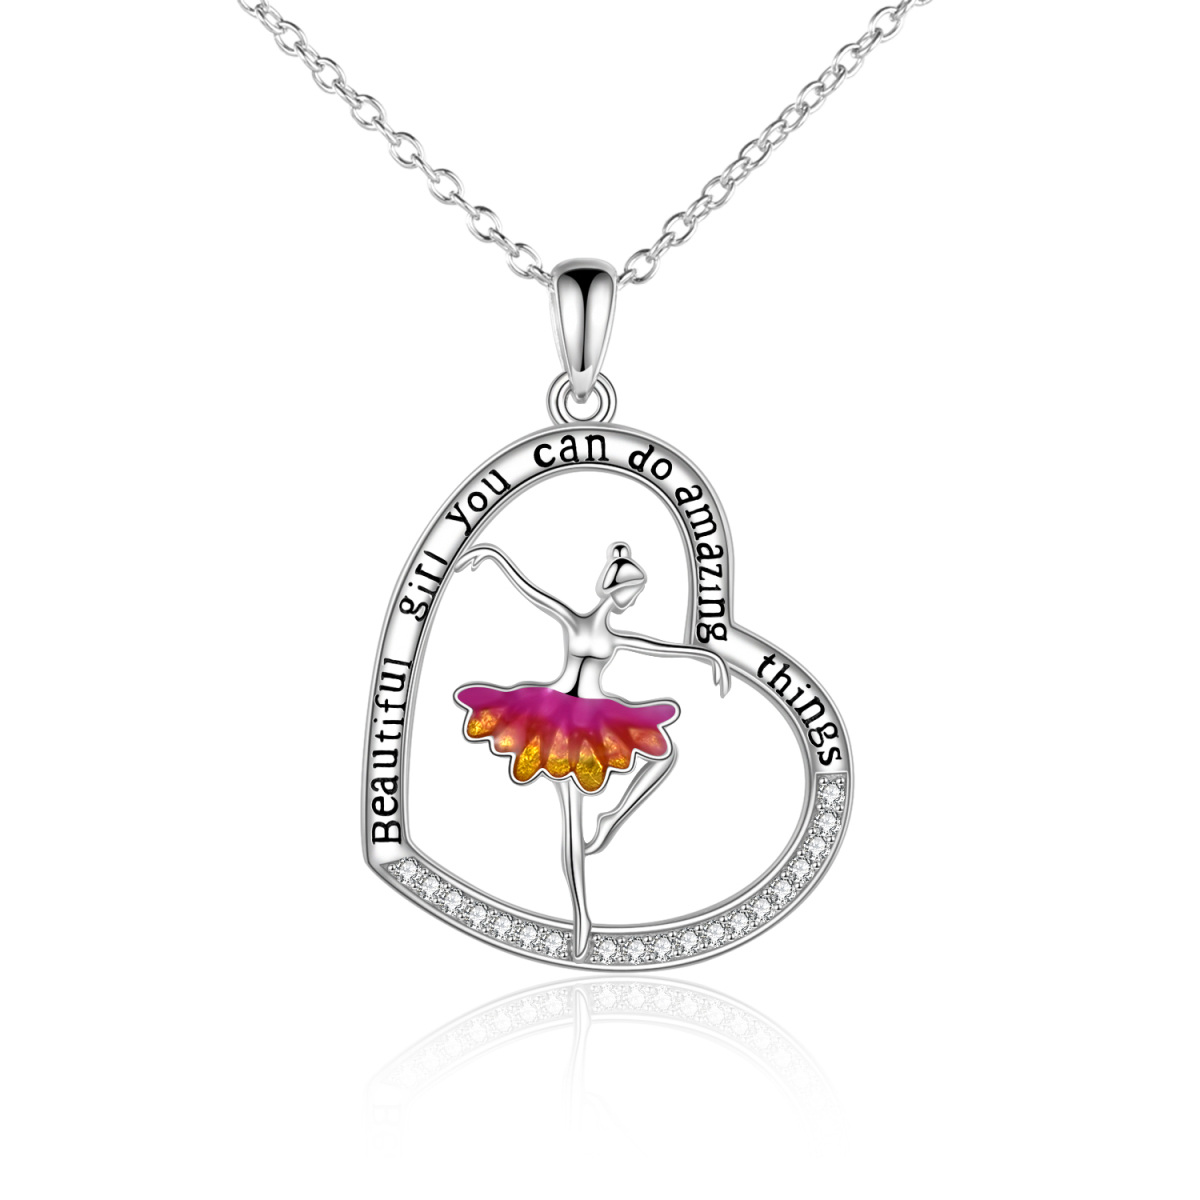 Sterling Silver Cubic Zirconia Ballet Dancer & Heart Pendant Necklace with Engraved Word-1